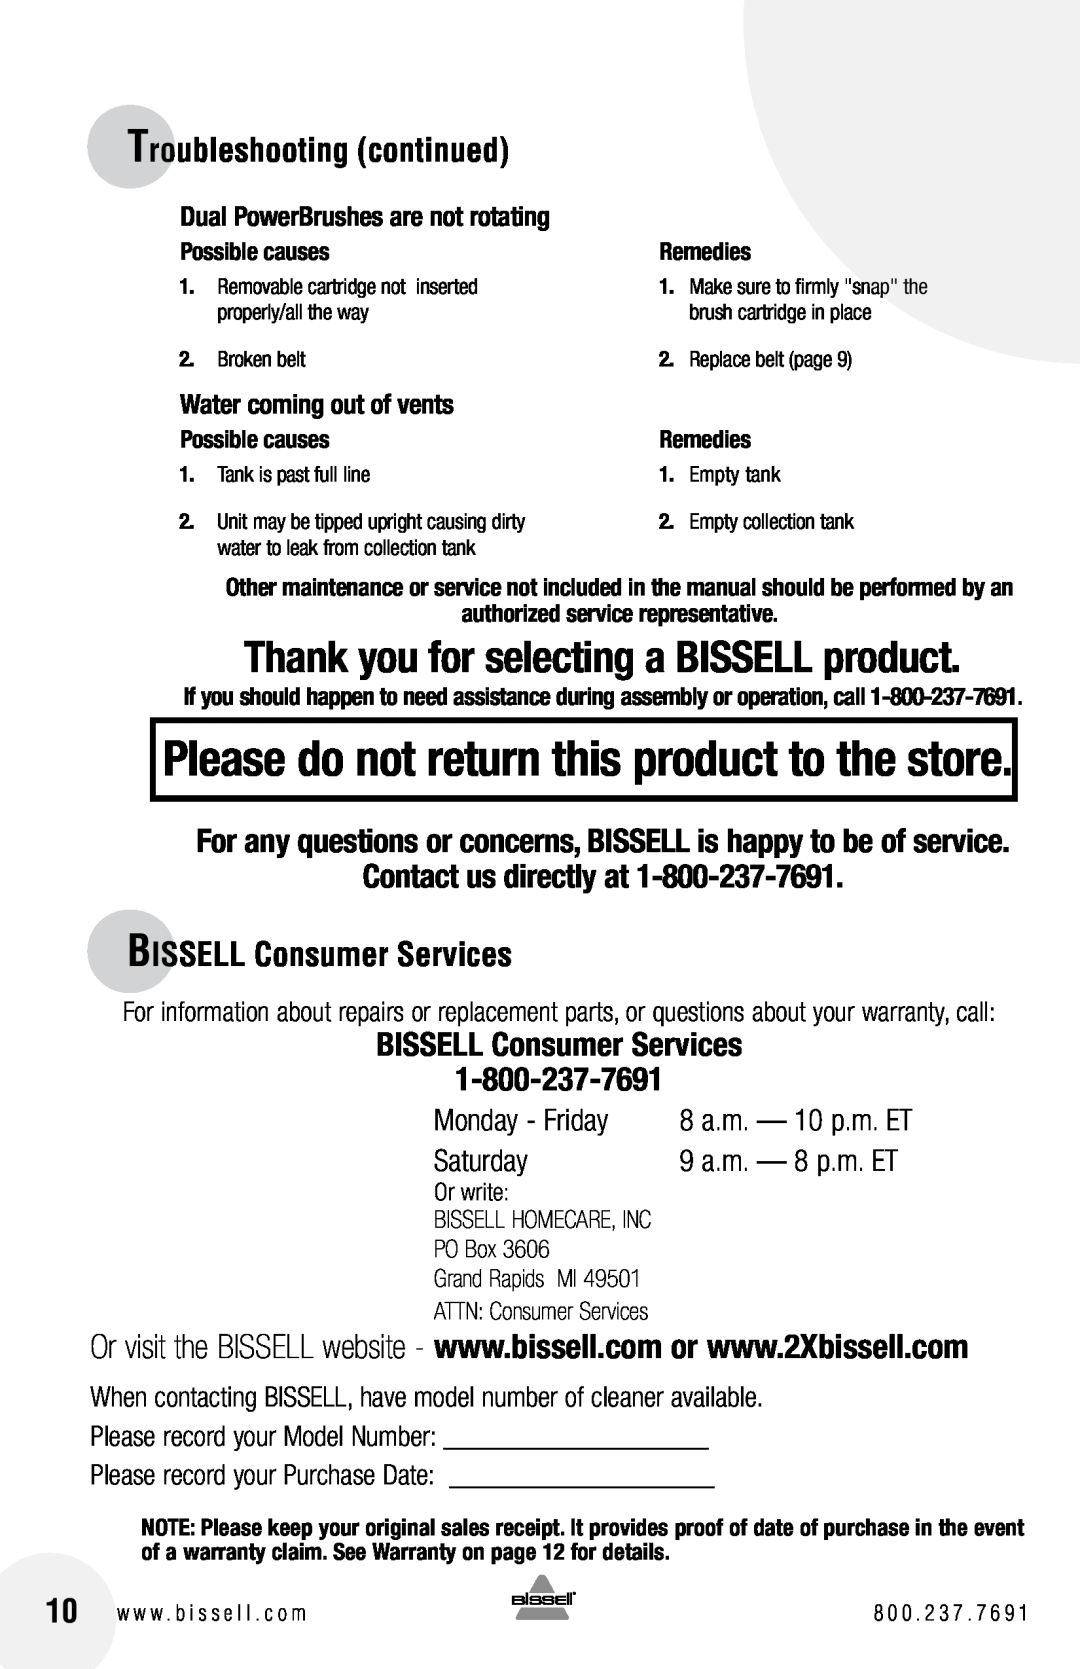 Bissell 1716 Thank you for selecting a BISSELL product, Troubleshooting continued, Contact us directly at, Monday - Friday 